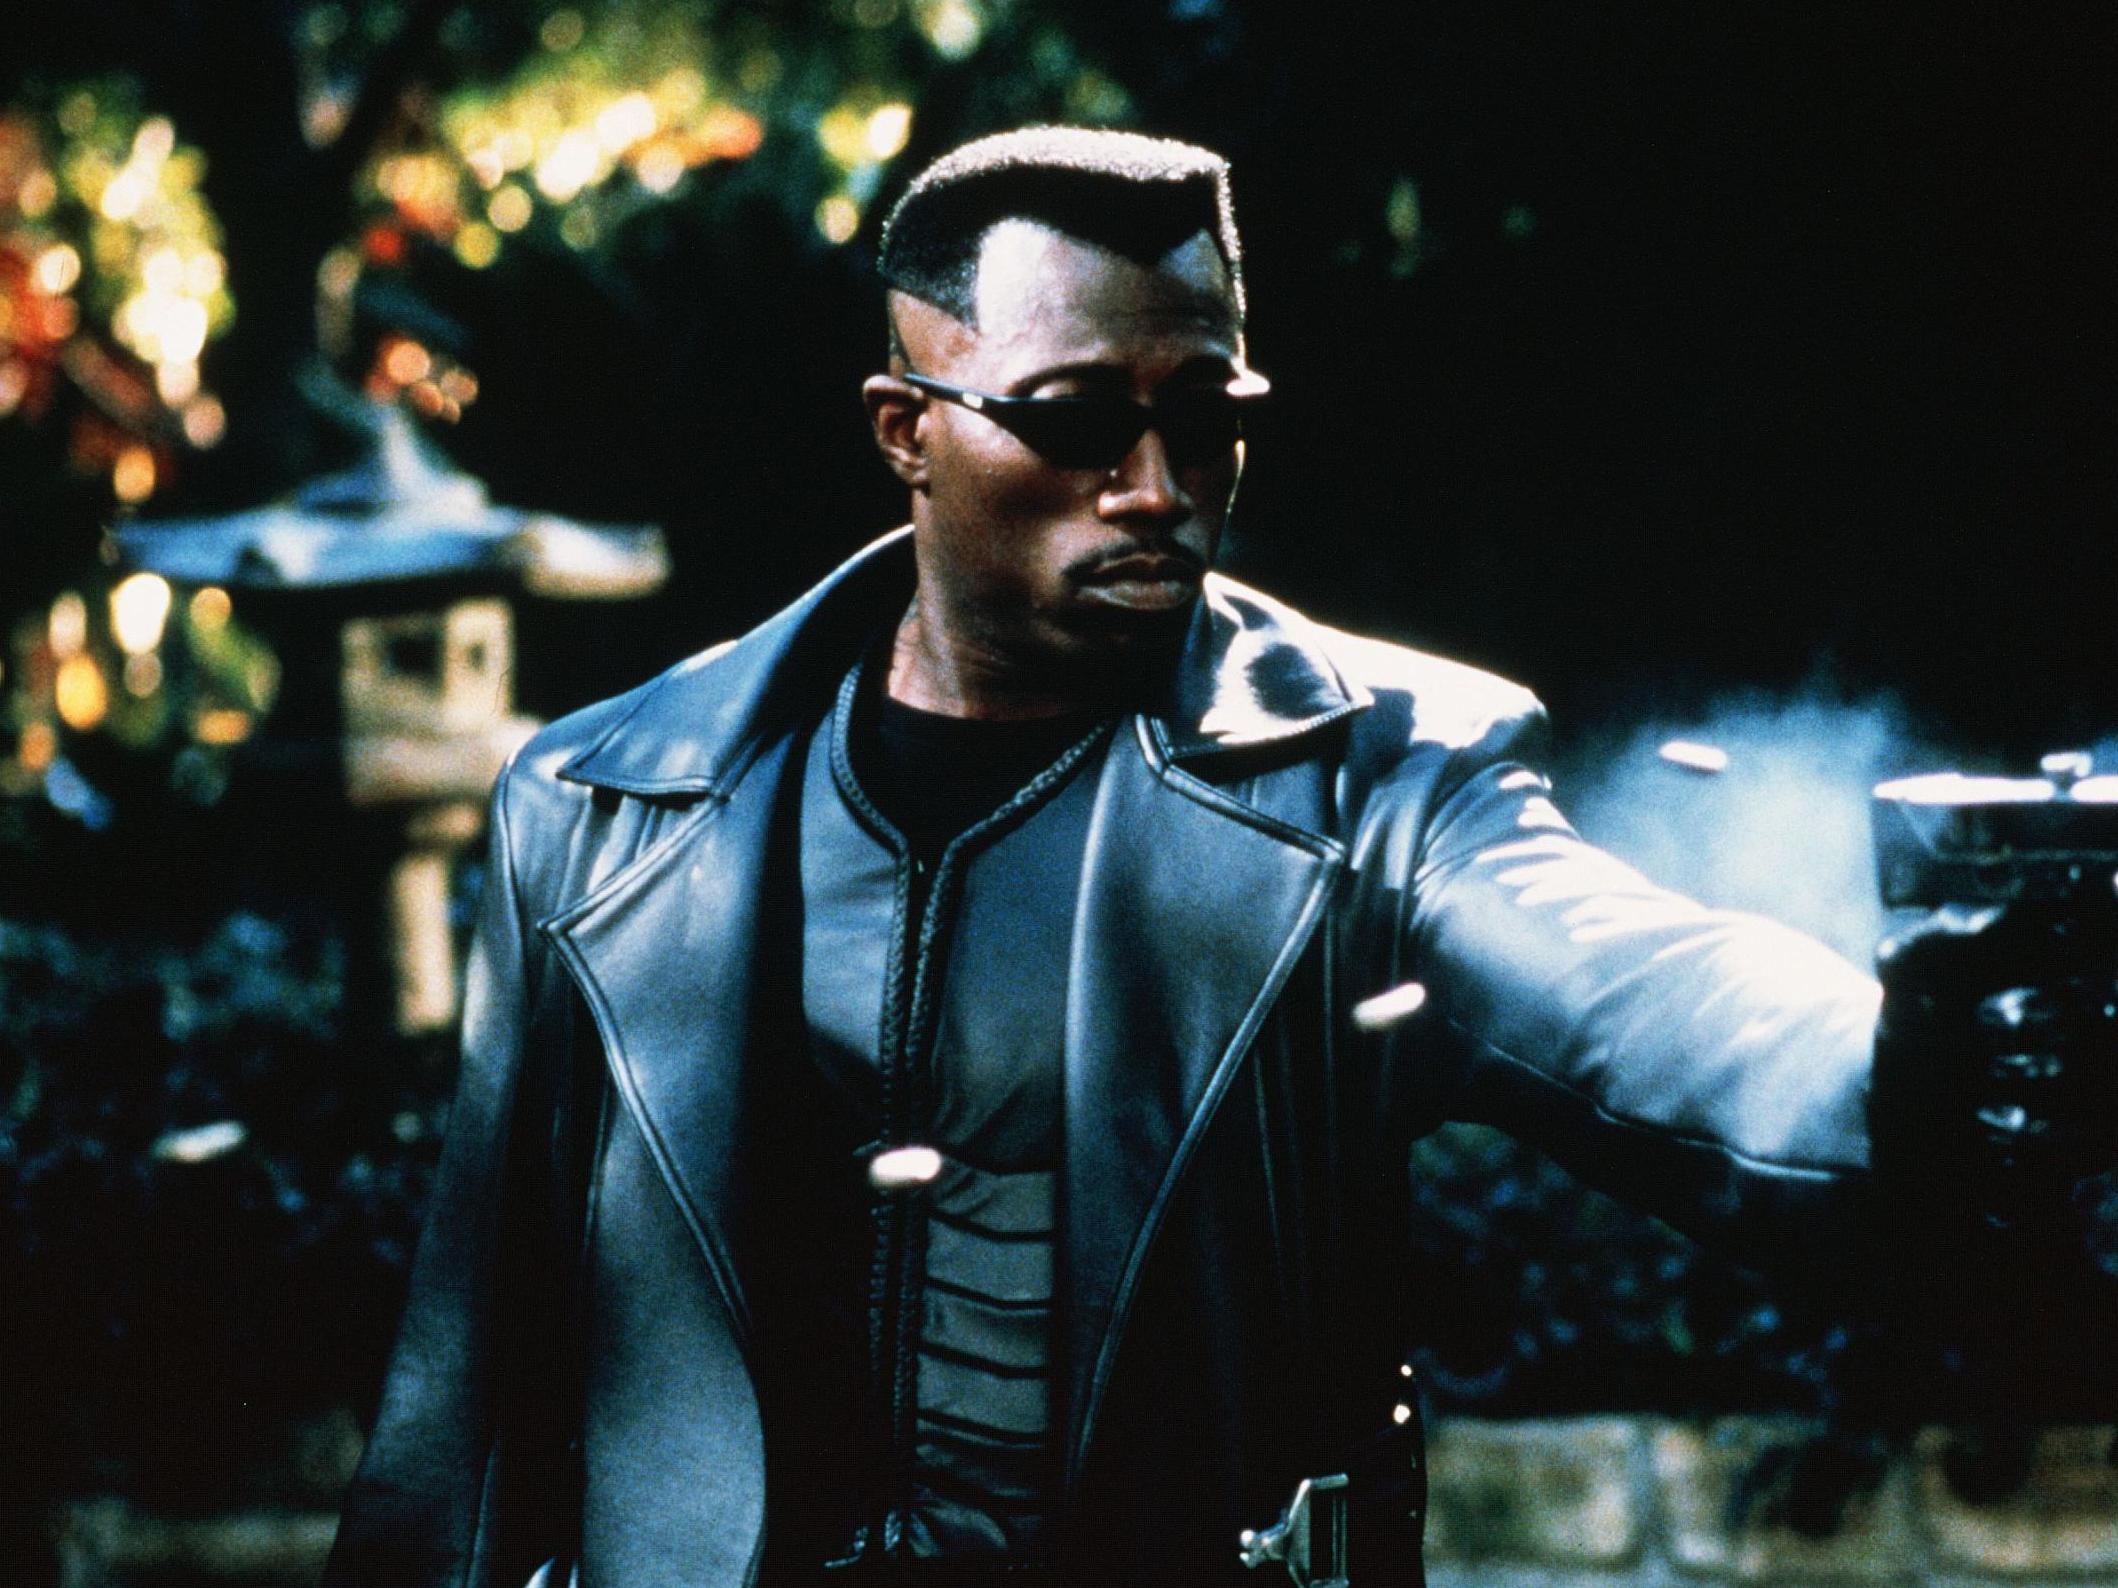 Avengers: Endgame wouldn't exist without Blade – the original Marvel film